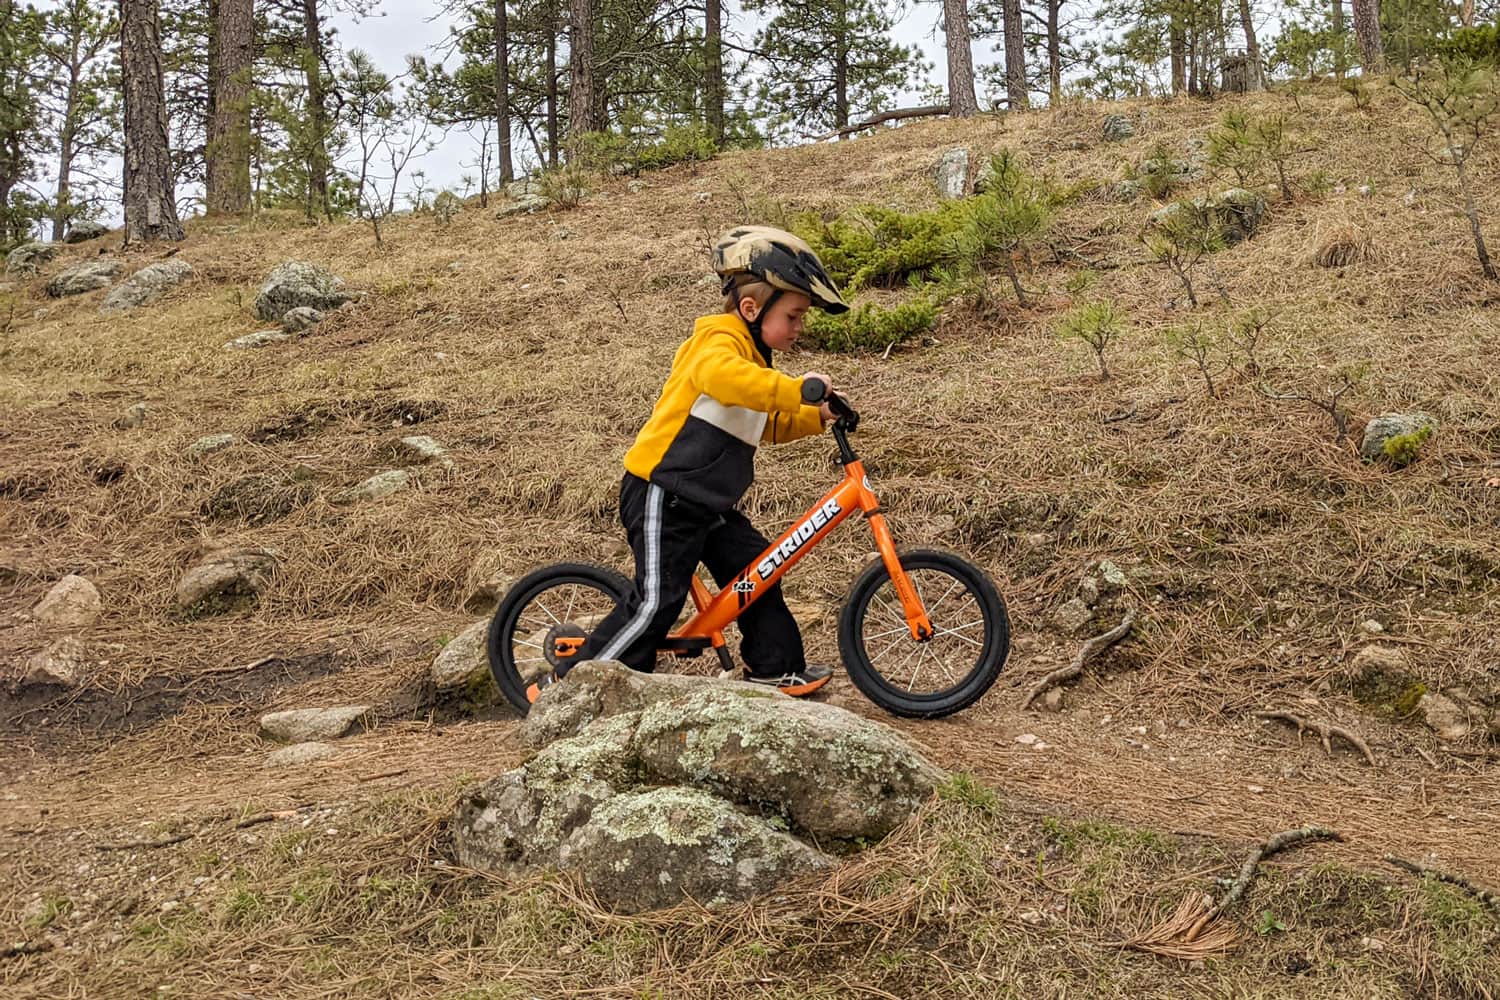 A child riding a Totally Tangerine colored Strider 14x Sport balance bike on a forest trail